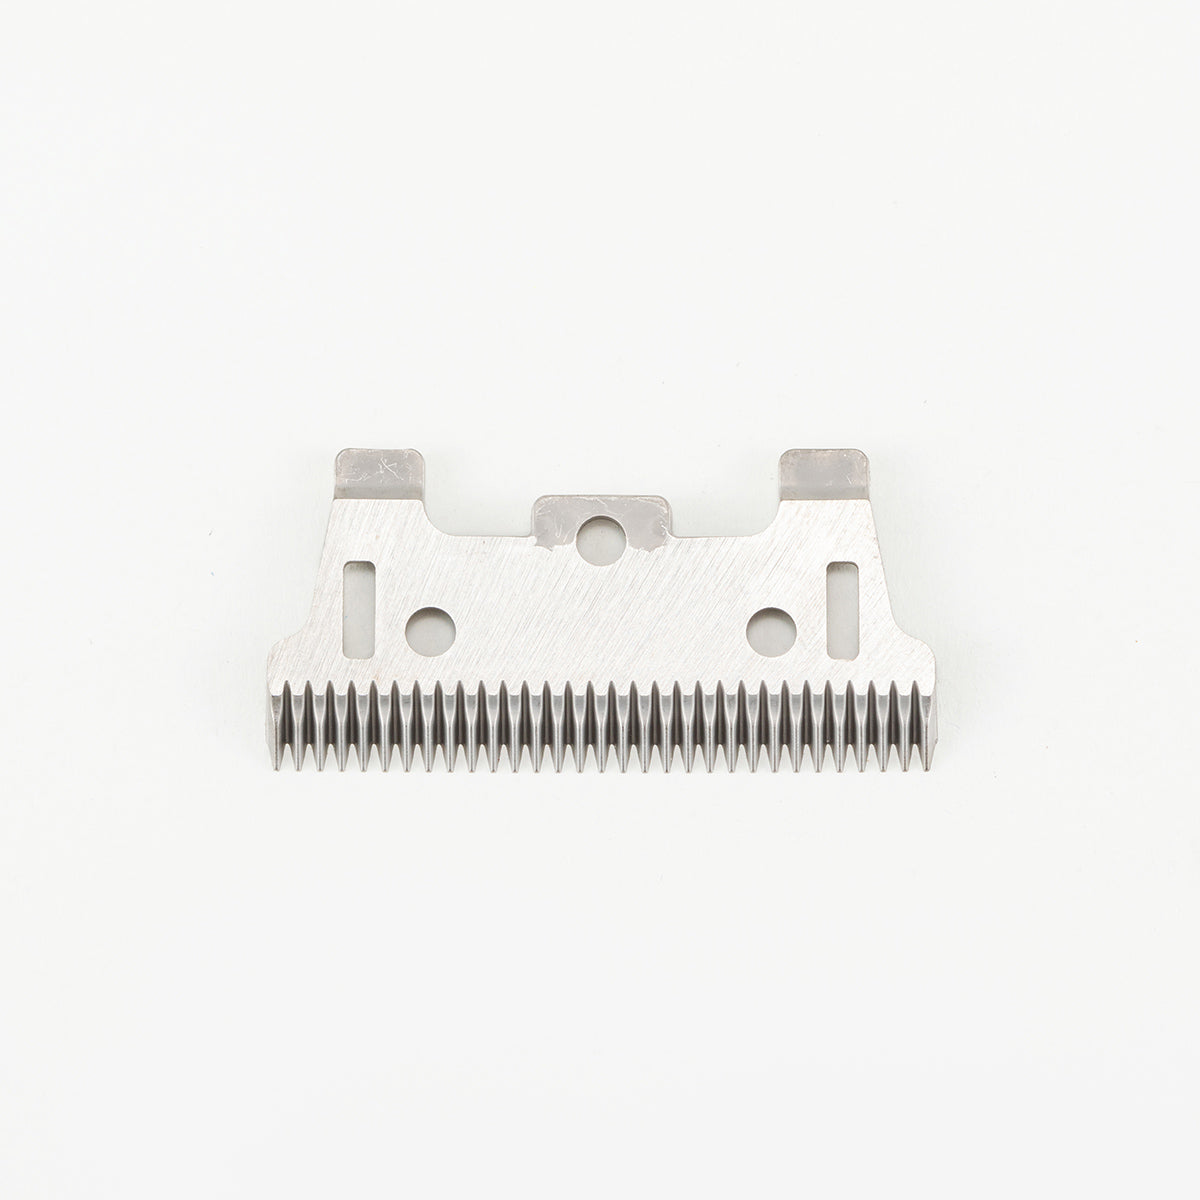 Stainless Steel Trimmer Blade Replacement Deep 31 Tooth